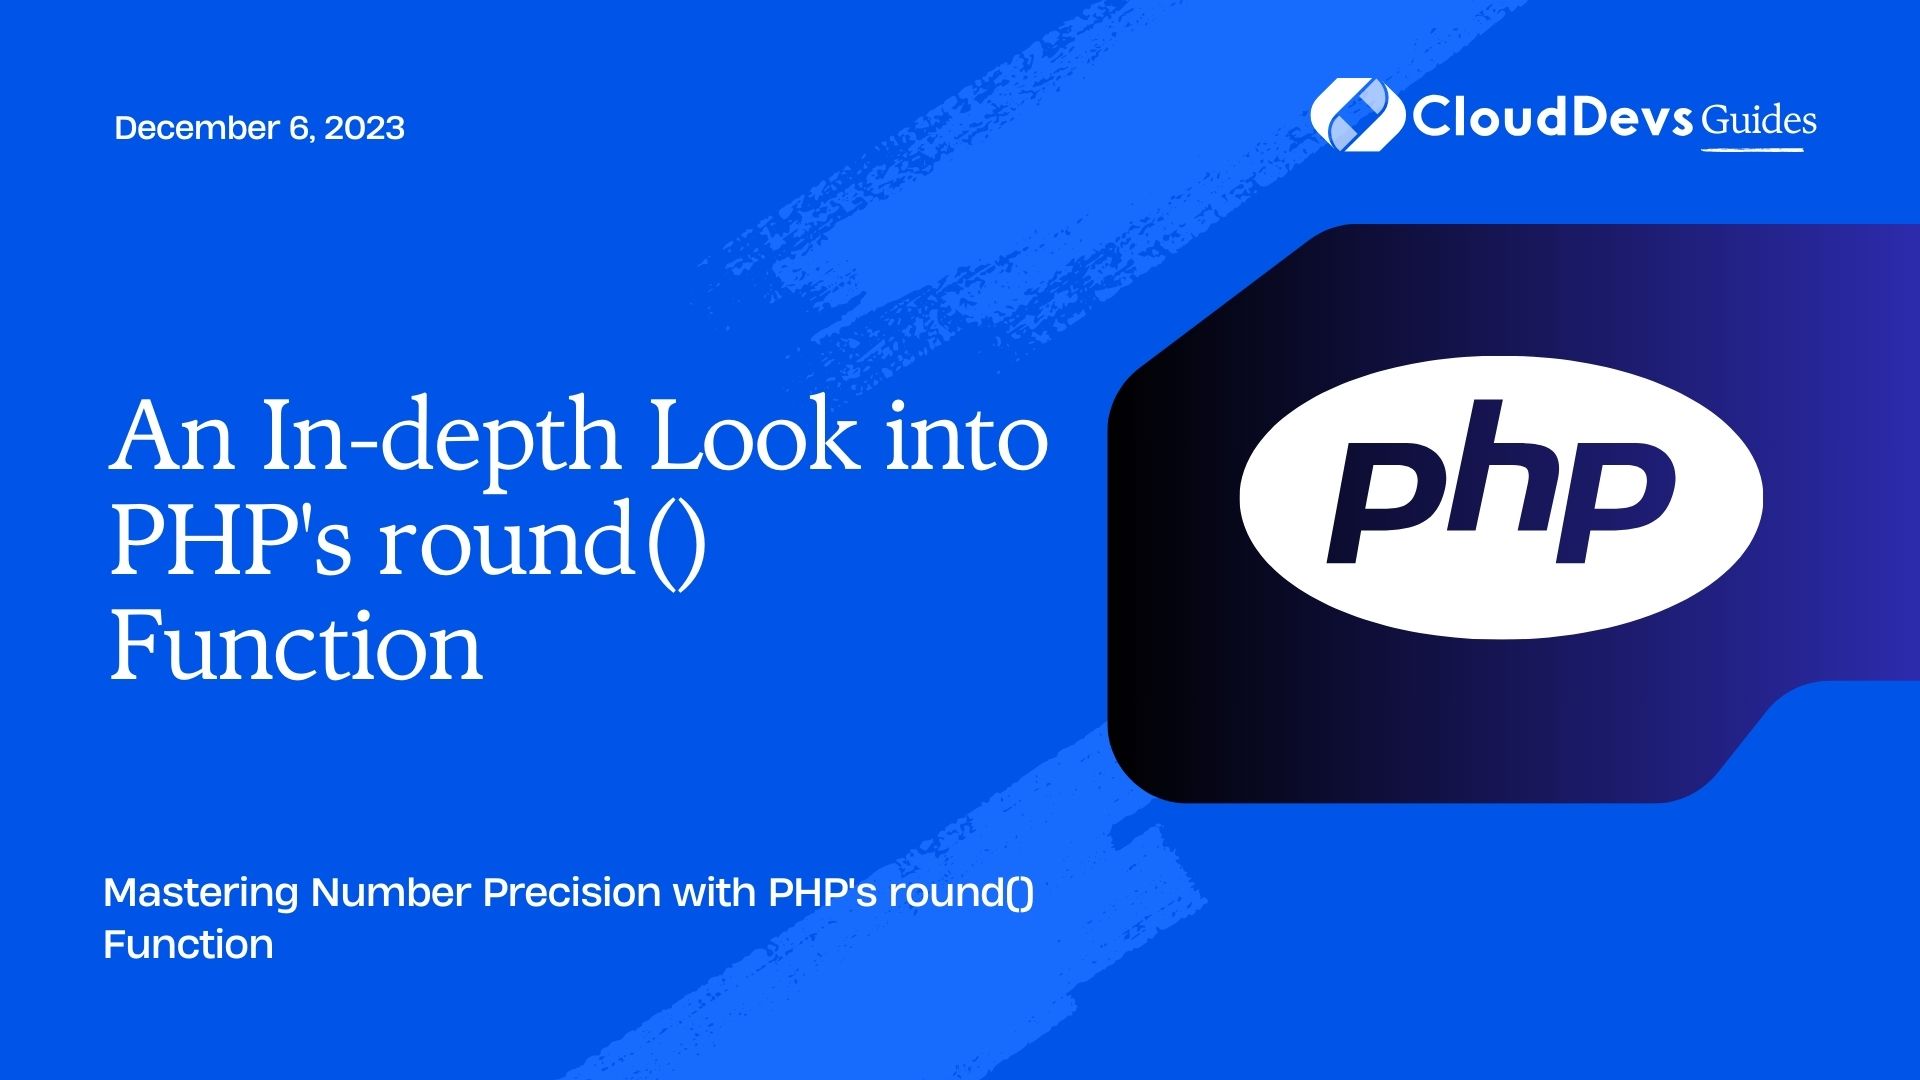 An In-depth Look into PHP's round() Function